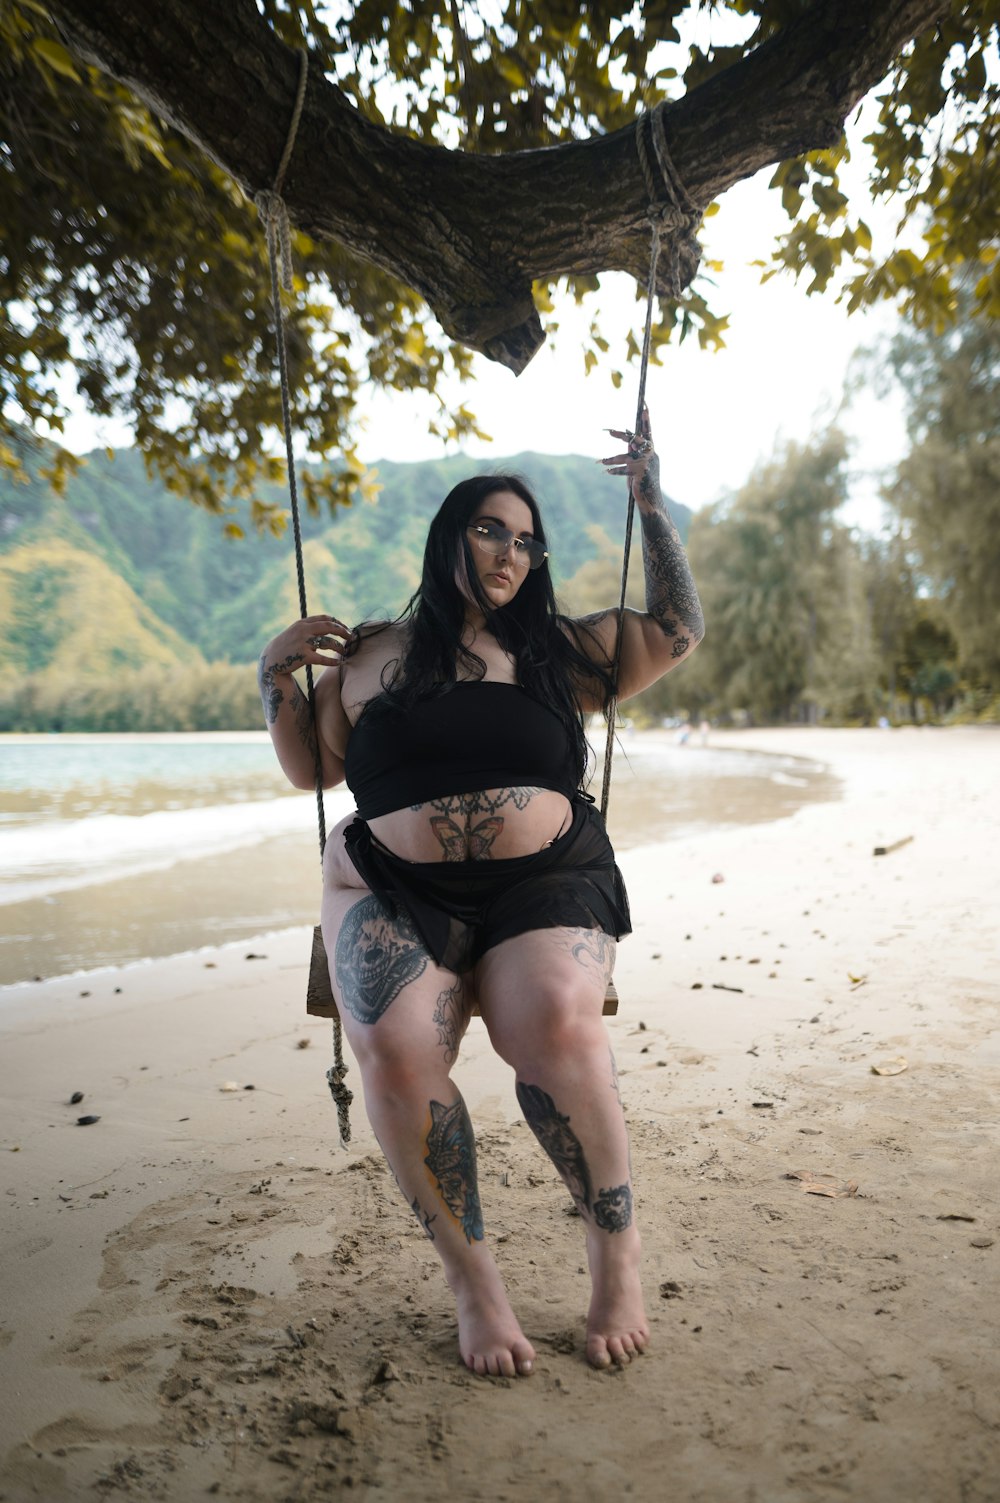 a woman in a black top is on a swing